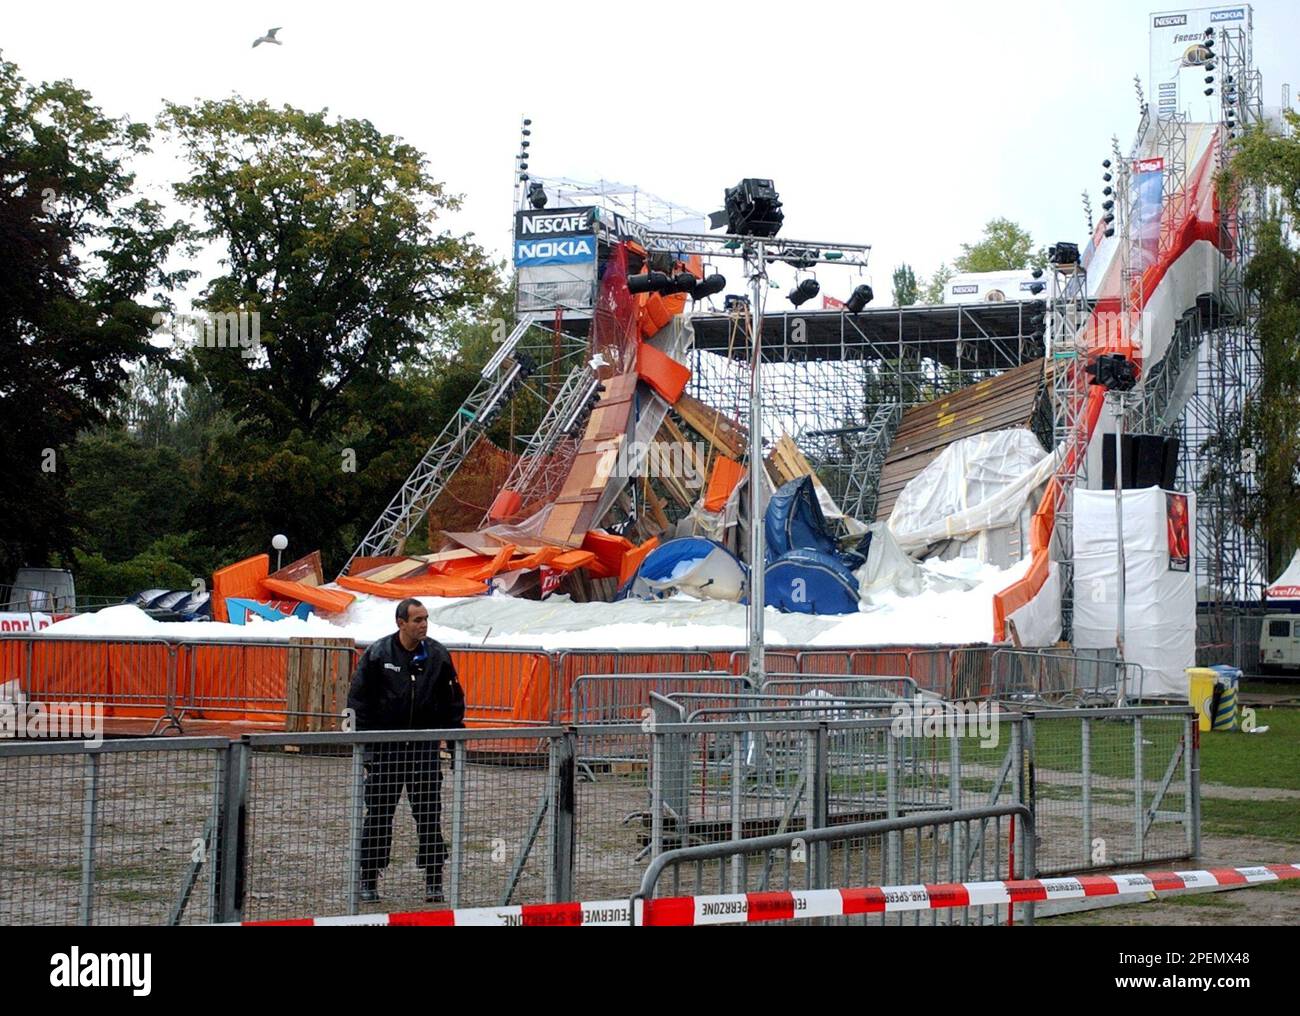 A security man stands in front of the collapsed ski jump of the  "freeystyle.ch" event at the Landiwiese festival place in Zurich,  Switzerland, Saturday, Sept. 25, 2004. The reason for the jumps